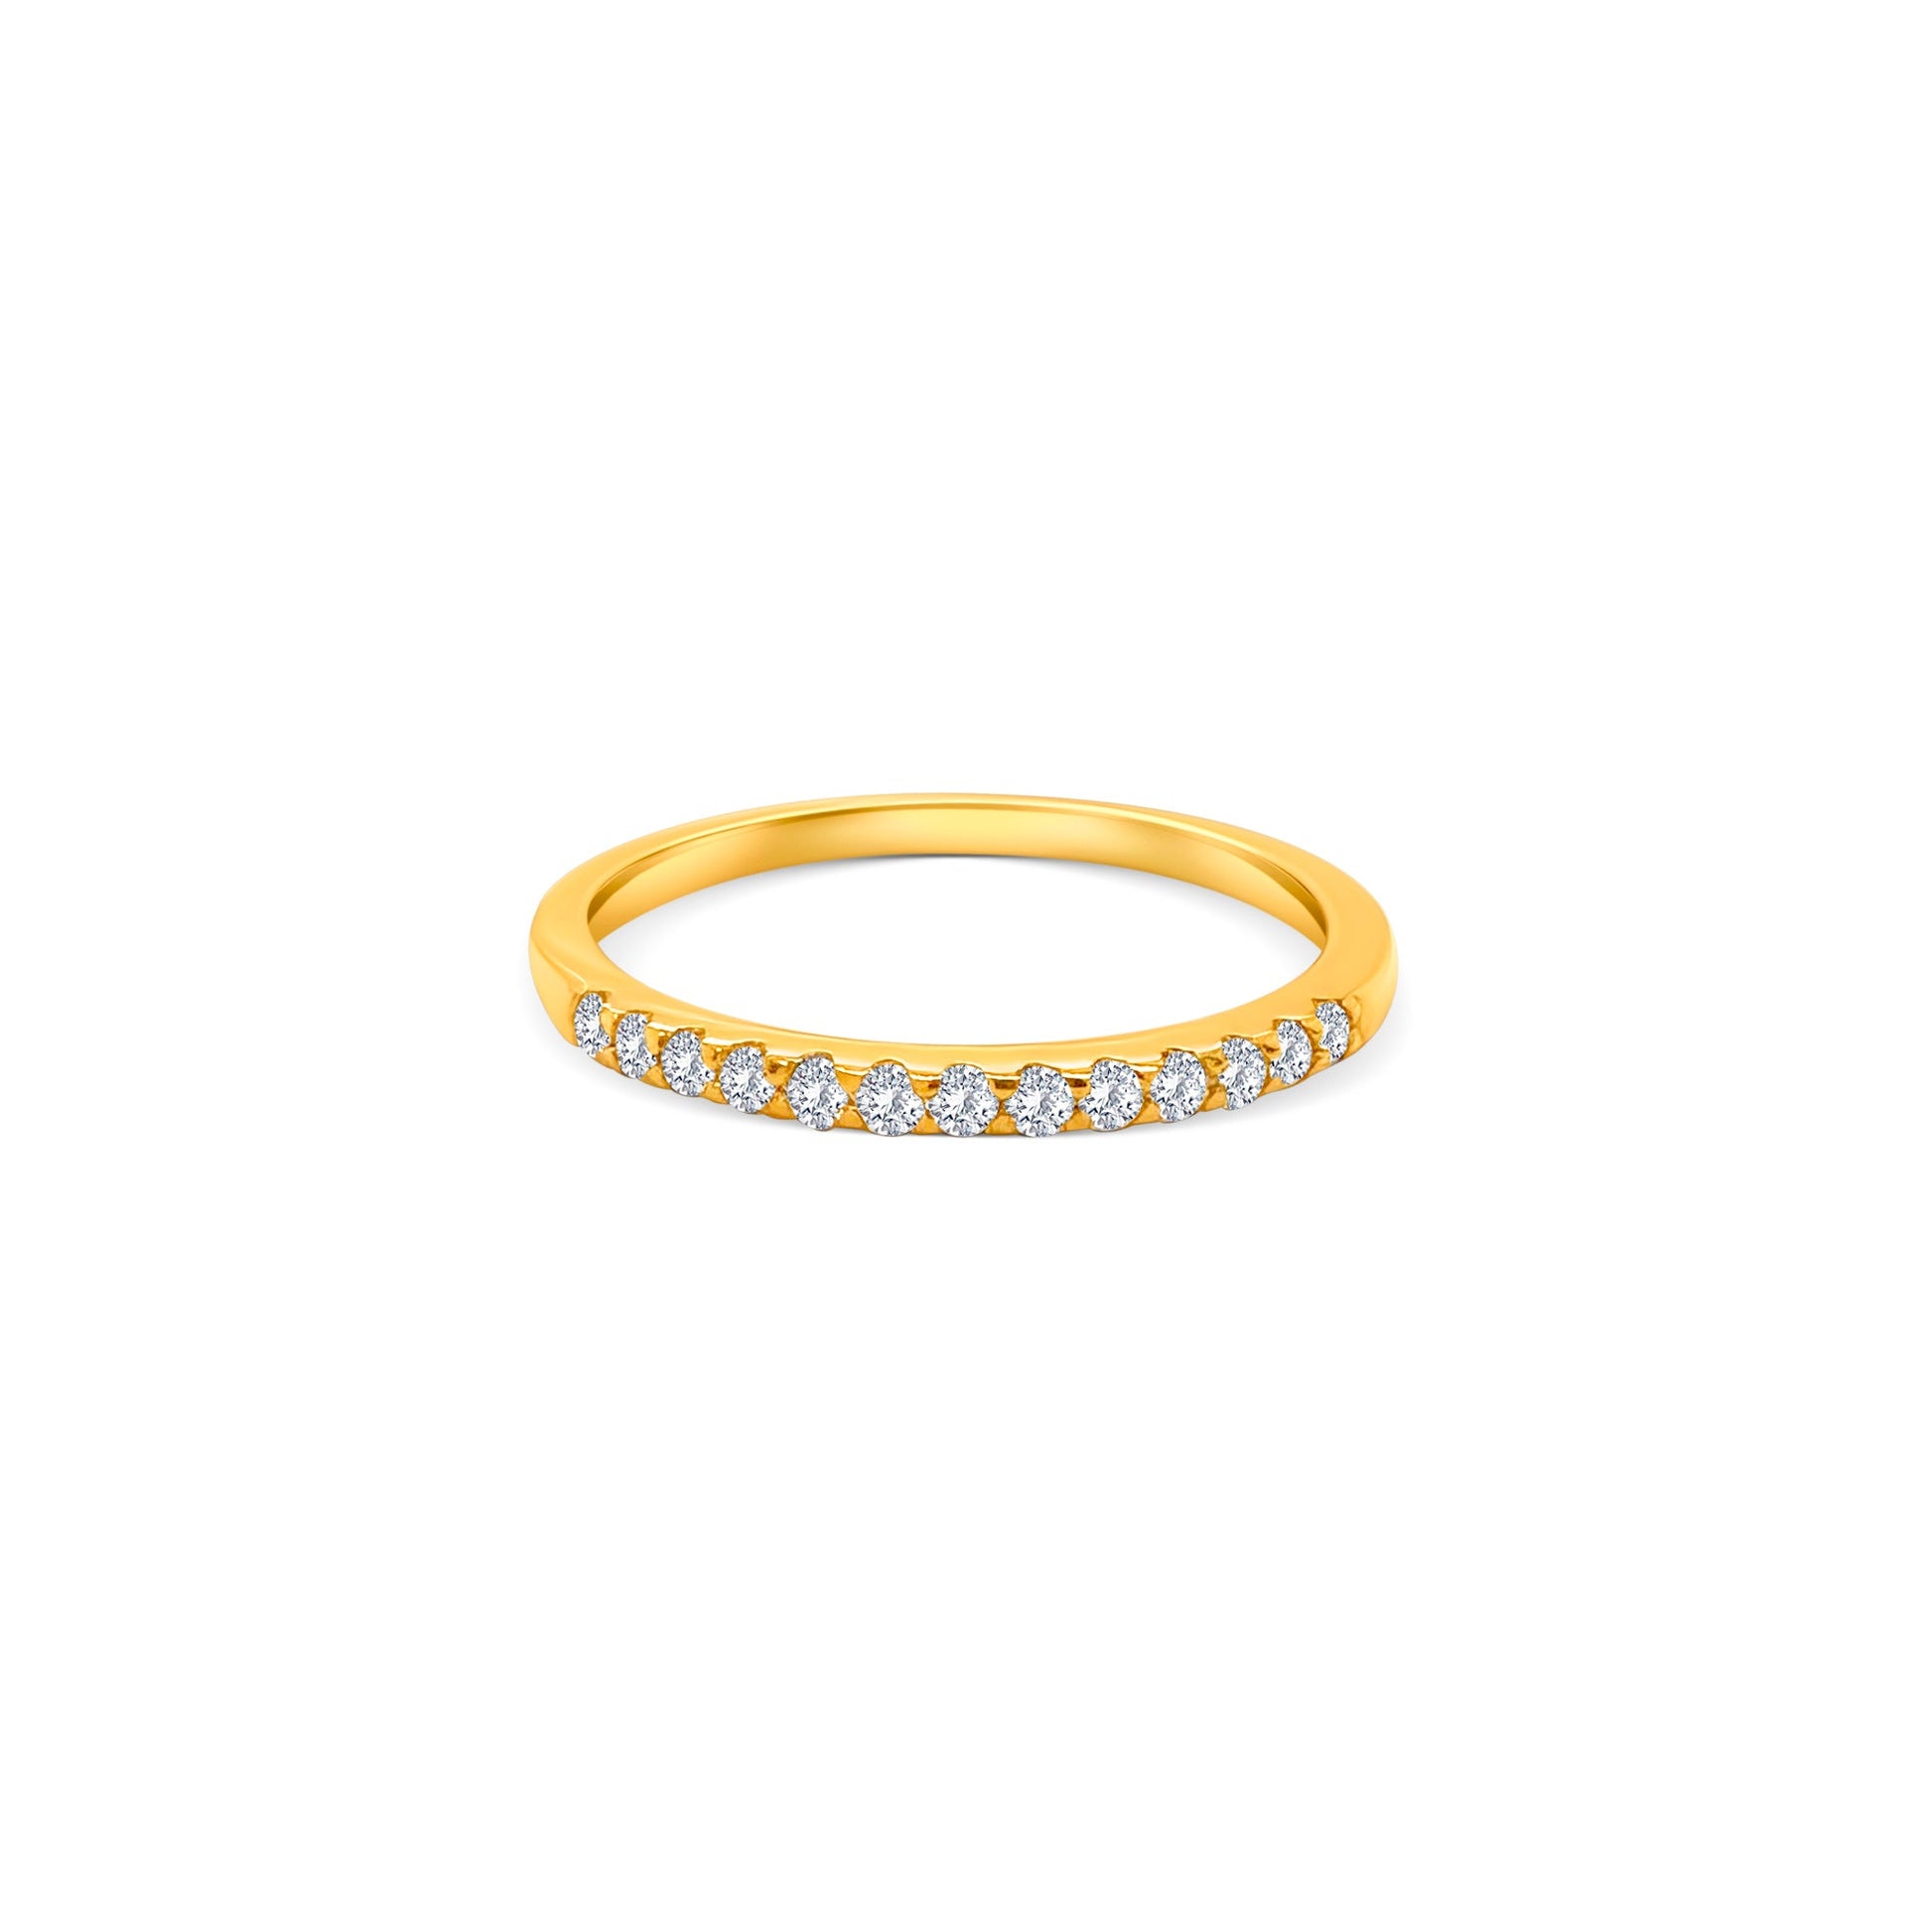 Round Brilliant Half Eternity Diamond Ring, Sparkling half eternity band, Featuring round brilliant diamonds, Elegant diamond-studded design, Symbol of eternal love and commitment, Perfect for special occasions and everyday wear